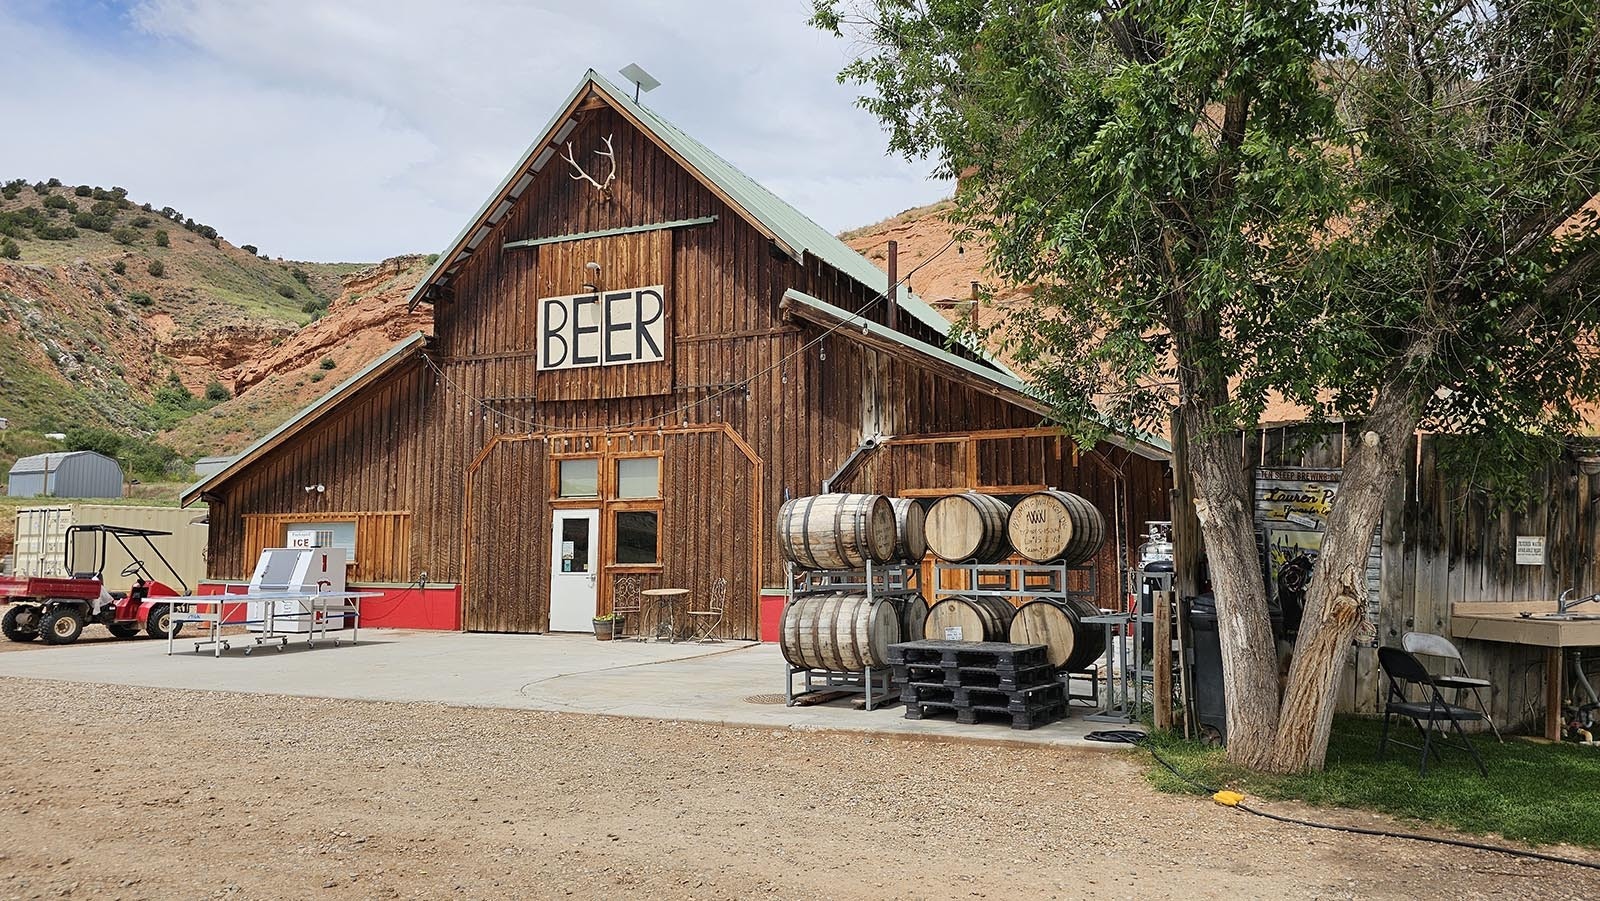 Ten Sleep Brewery is right up against the colorful Signal Cliff in an unpretentious barn.